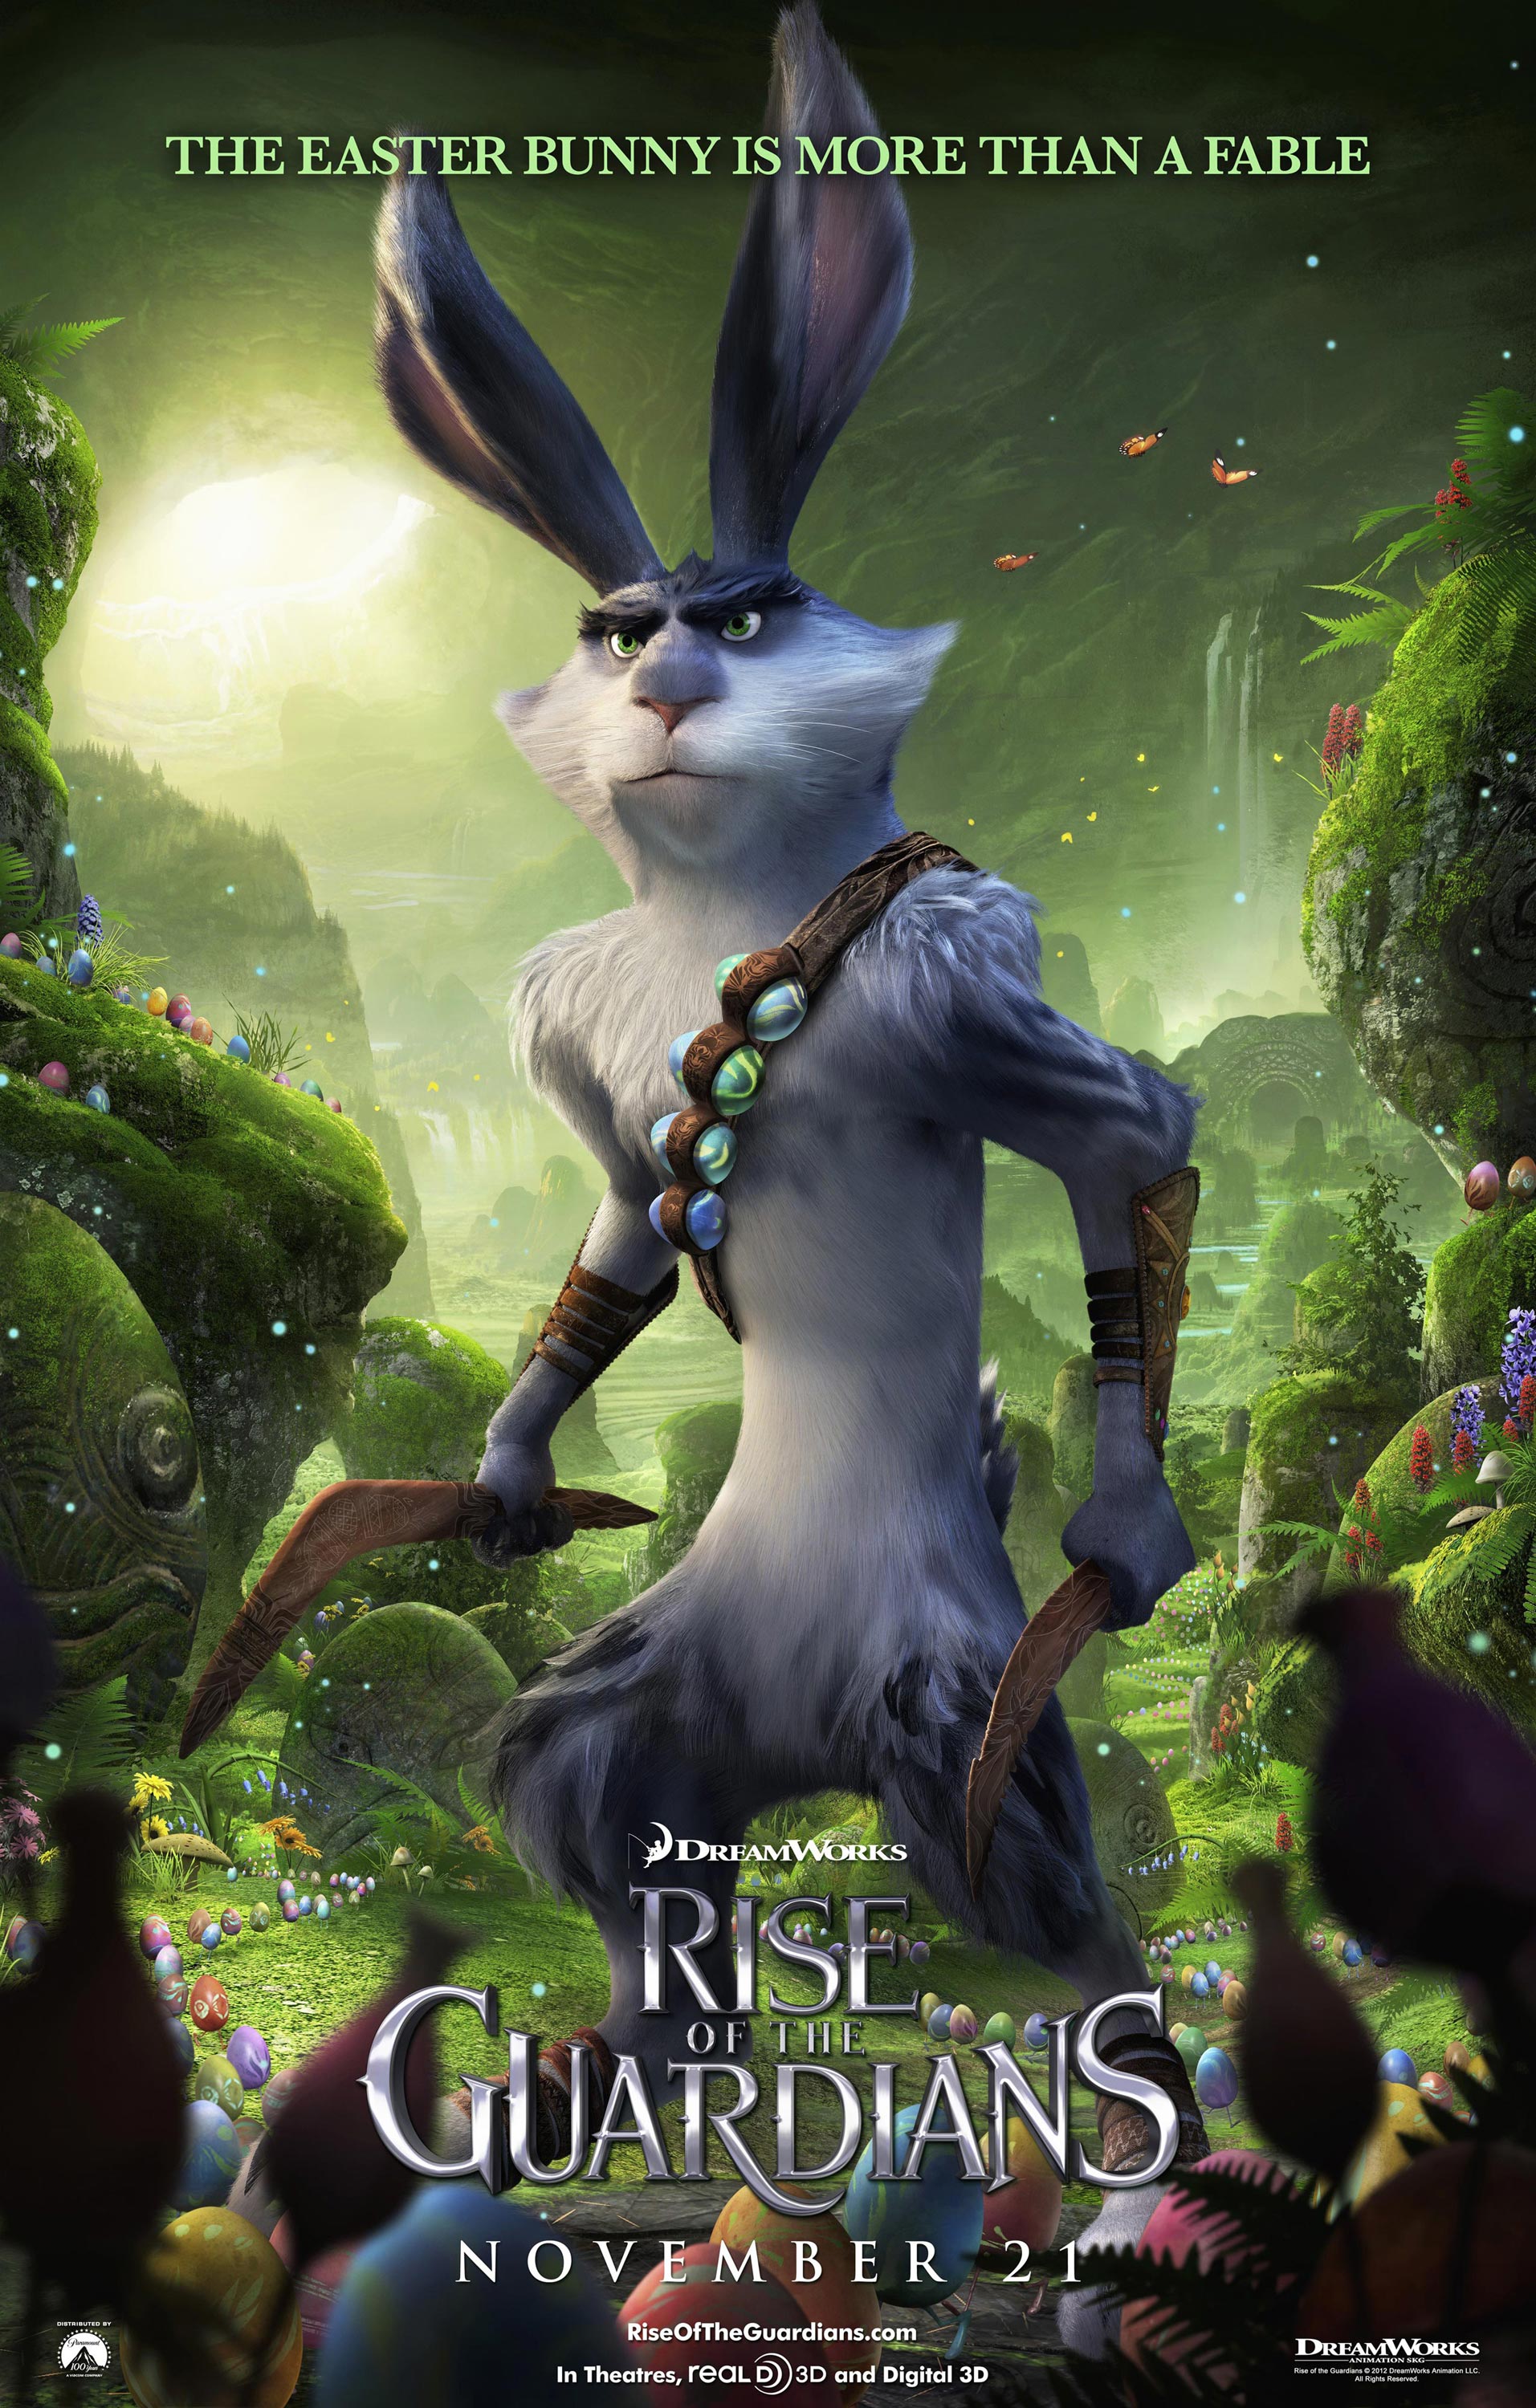 Six RISE OF THE GUARDIANS Character Posters – FilmoFilia